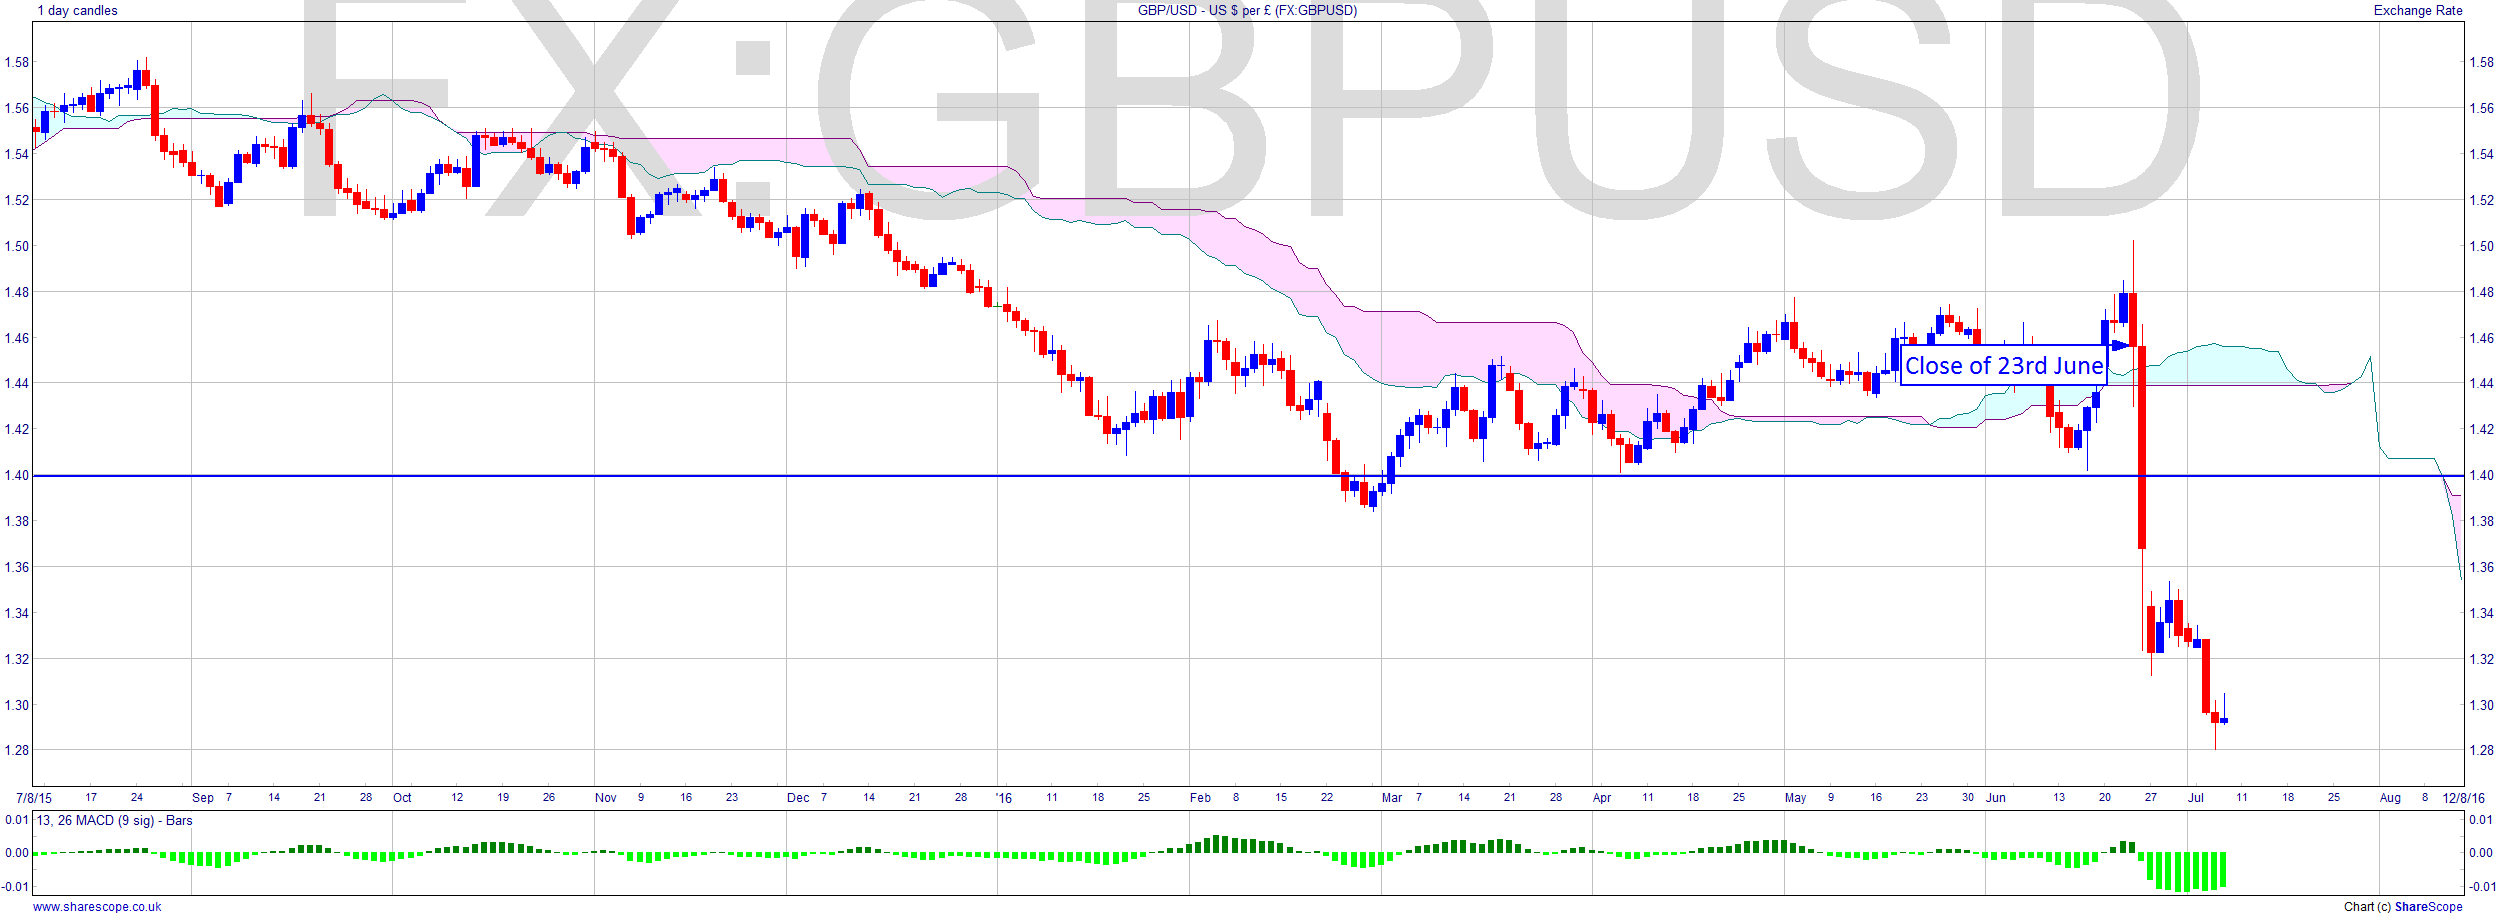 FX_GBPUSD daily post brexit 160708